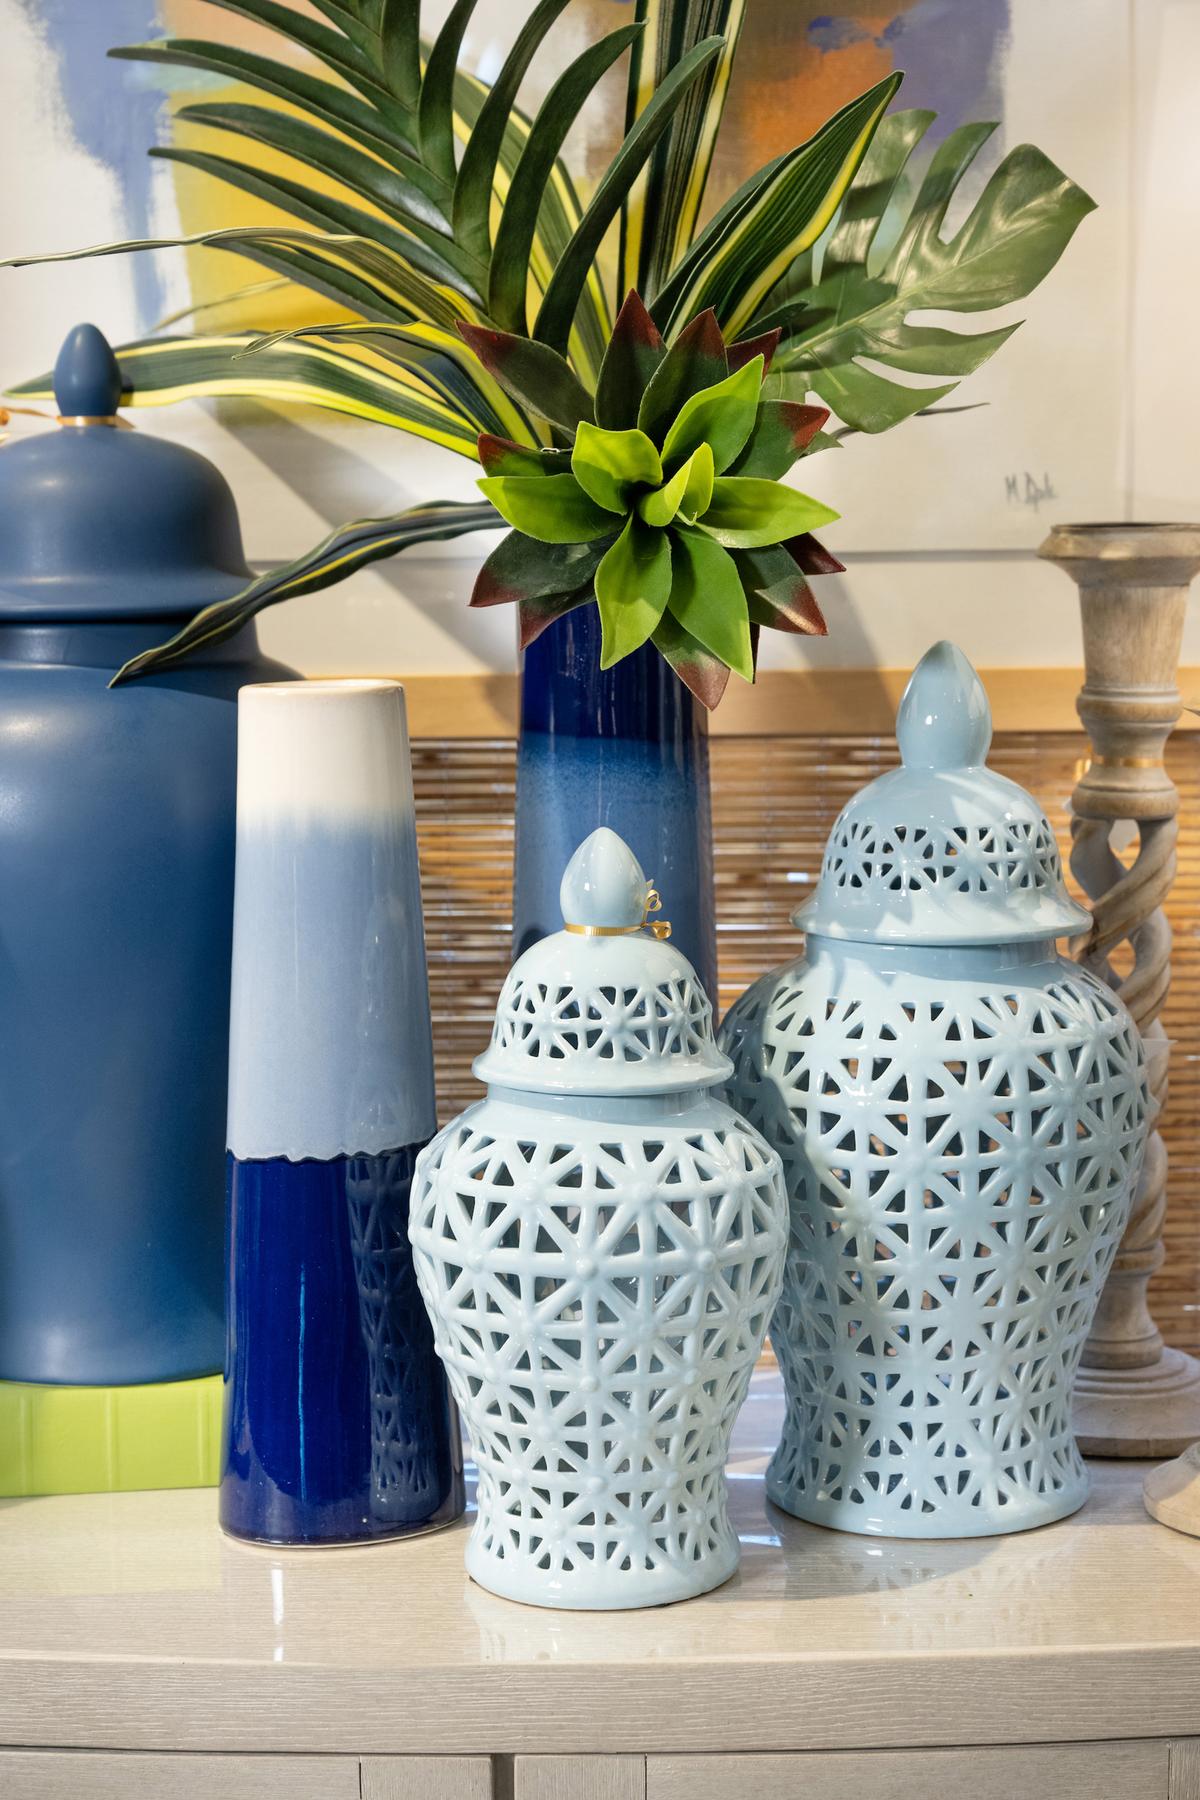 These lidded vases with geometric cutouts add whimsical texture to a tabletop display. (Handout/TNS)